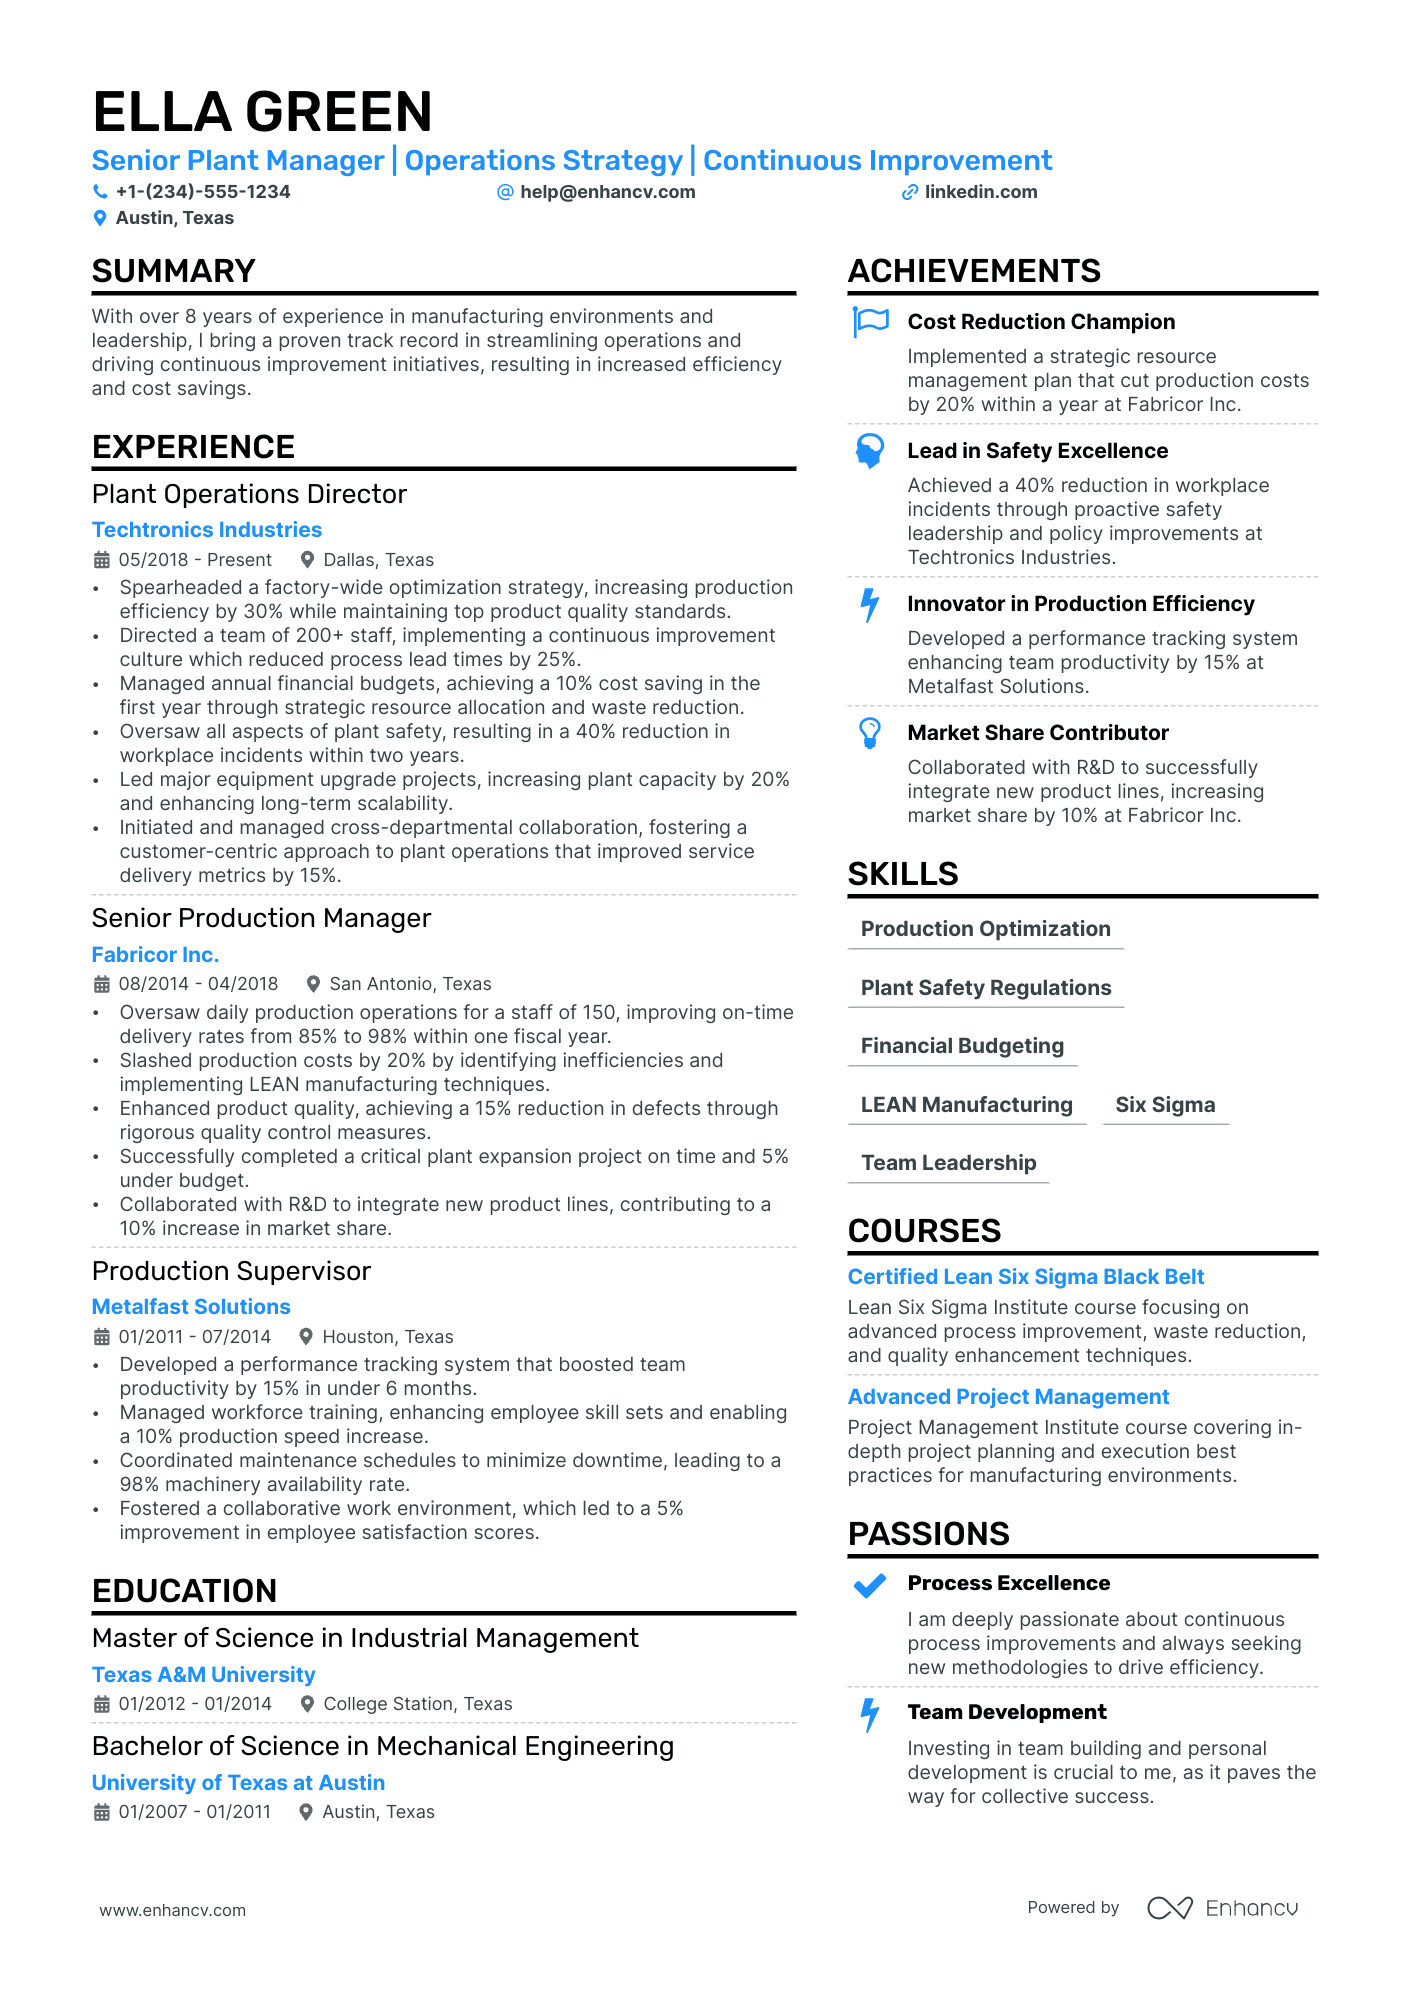 Factory Manager resume example